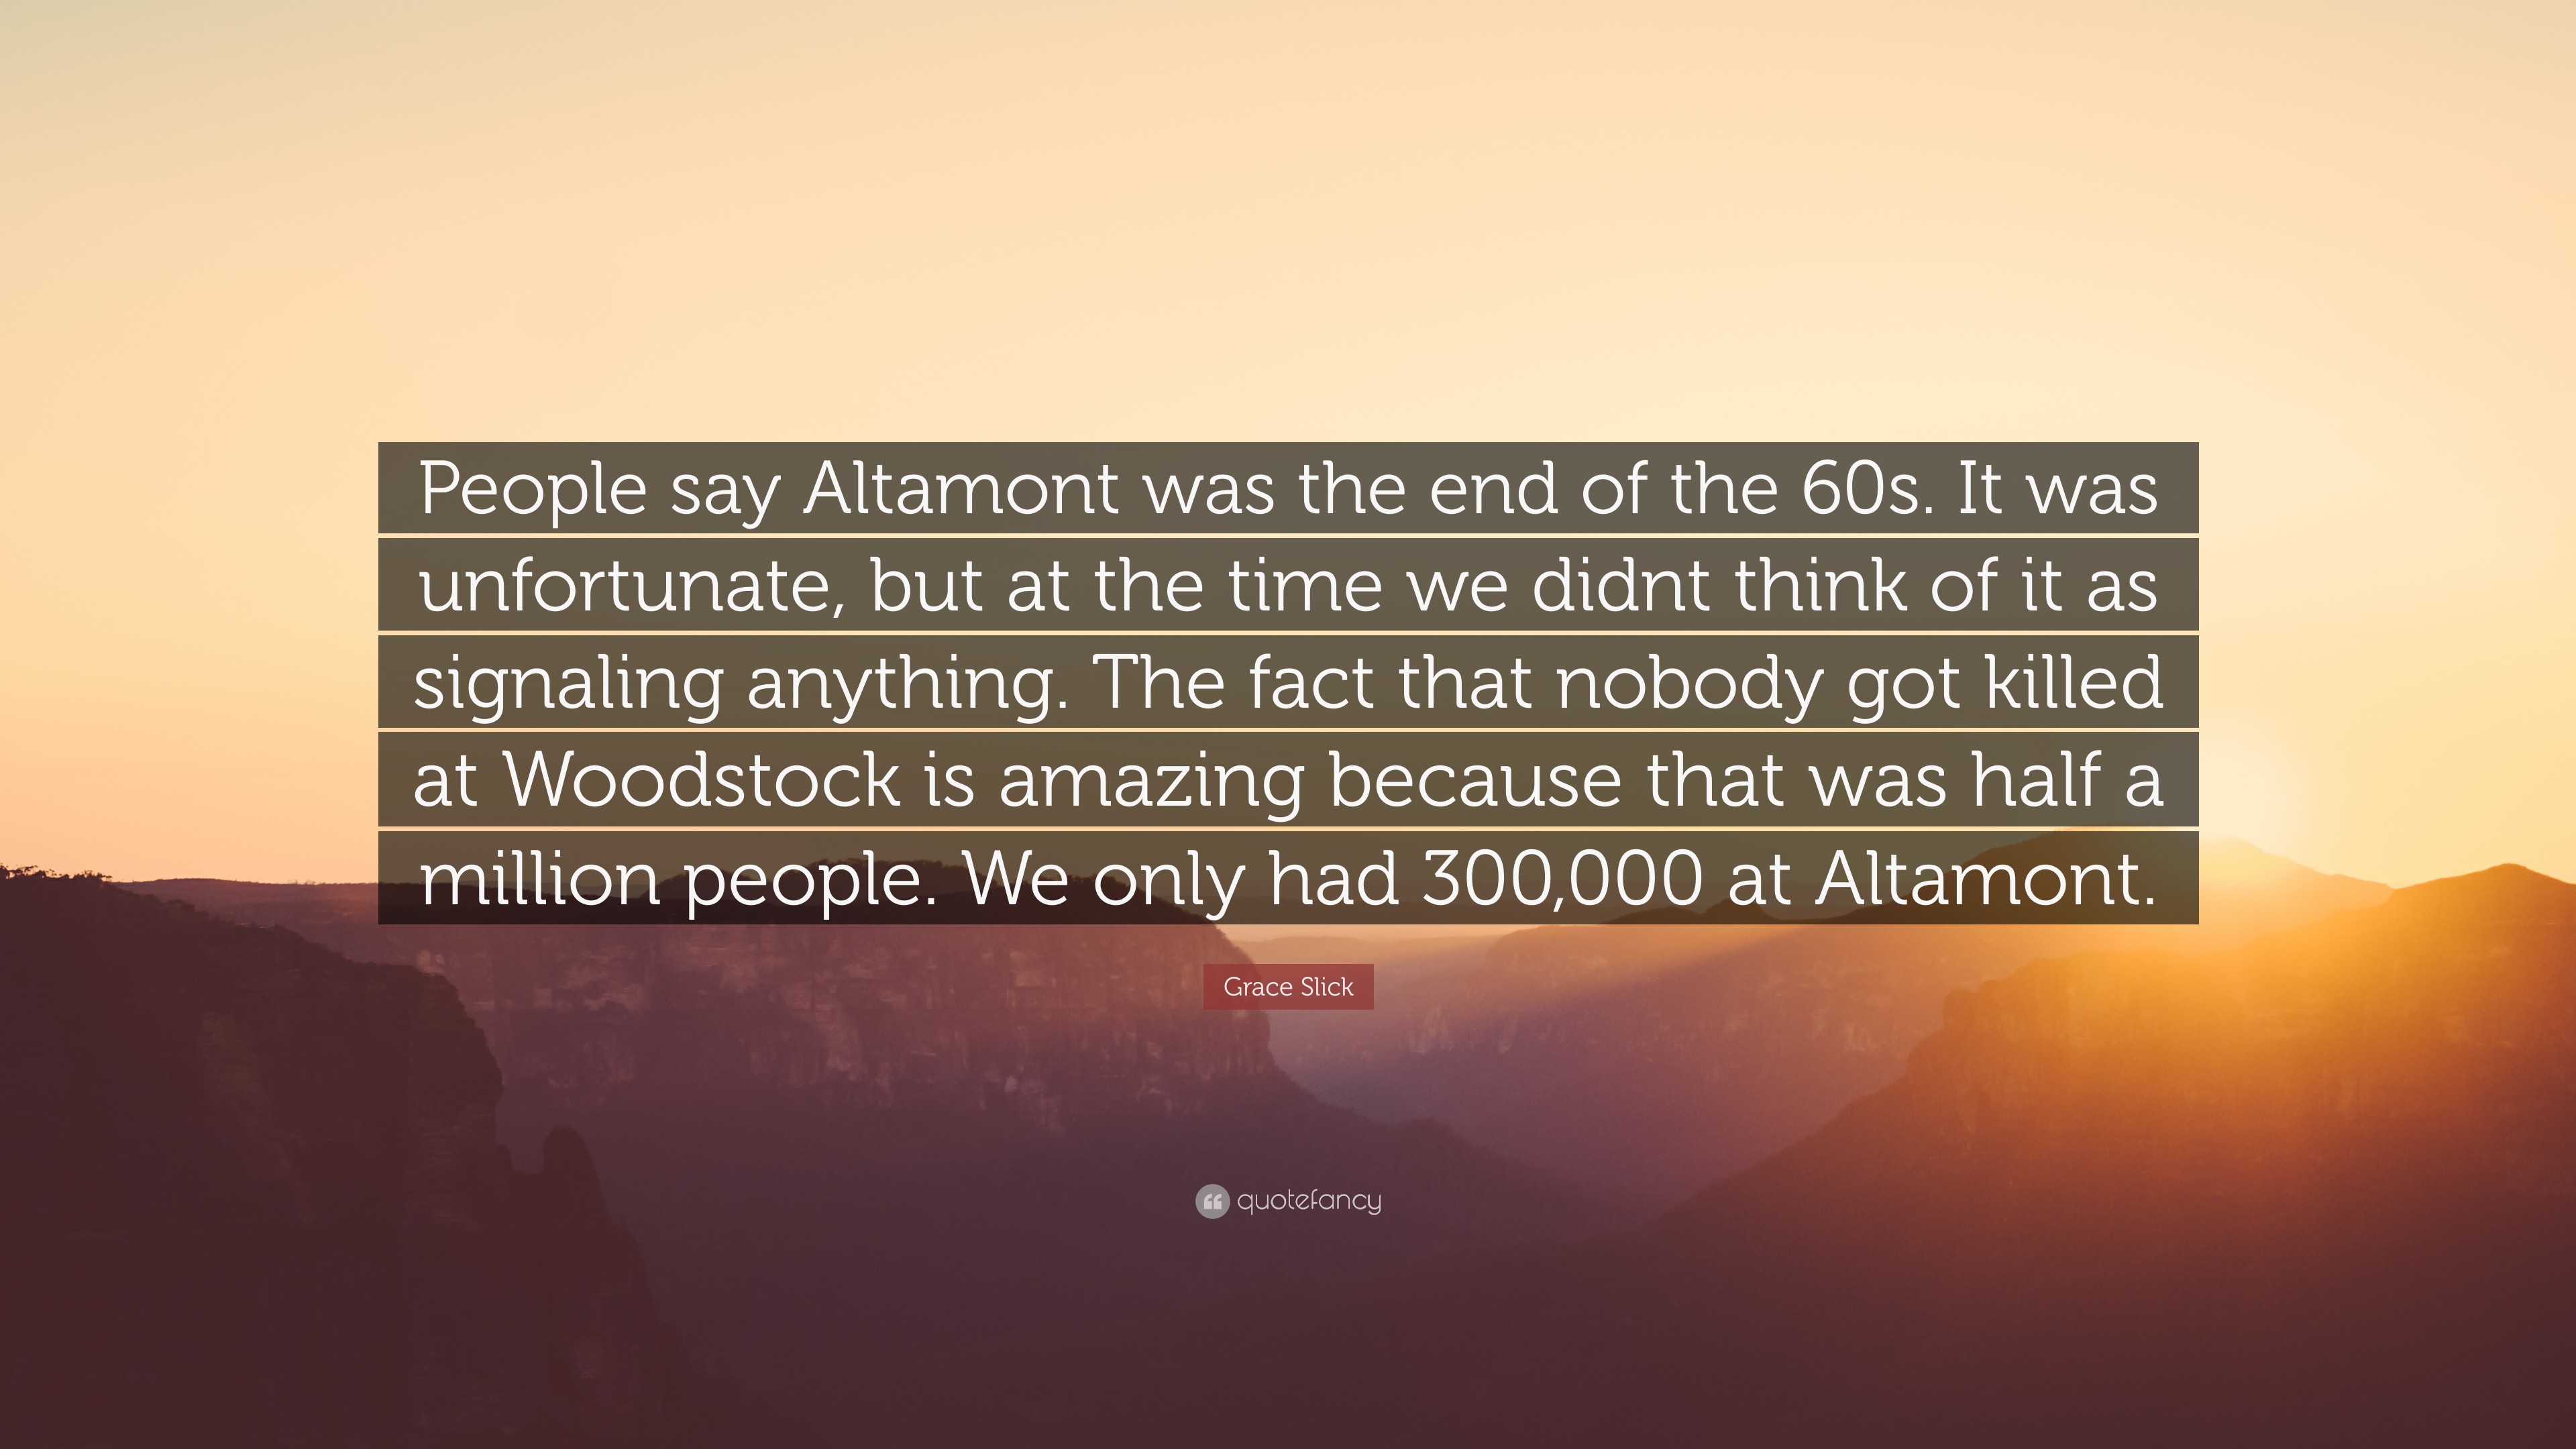 3840x2160 Grace Slick Quote: “People say Altamont was the end of the 60s. It